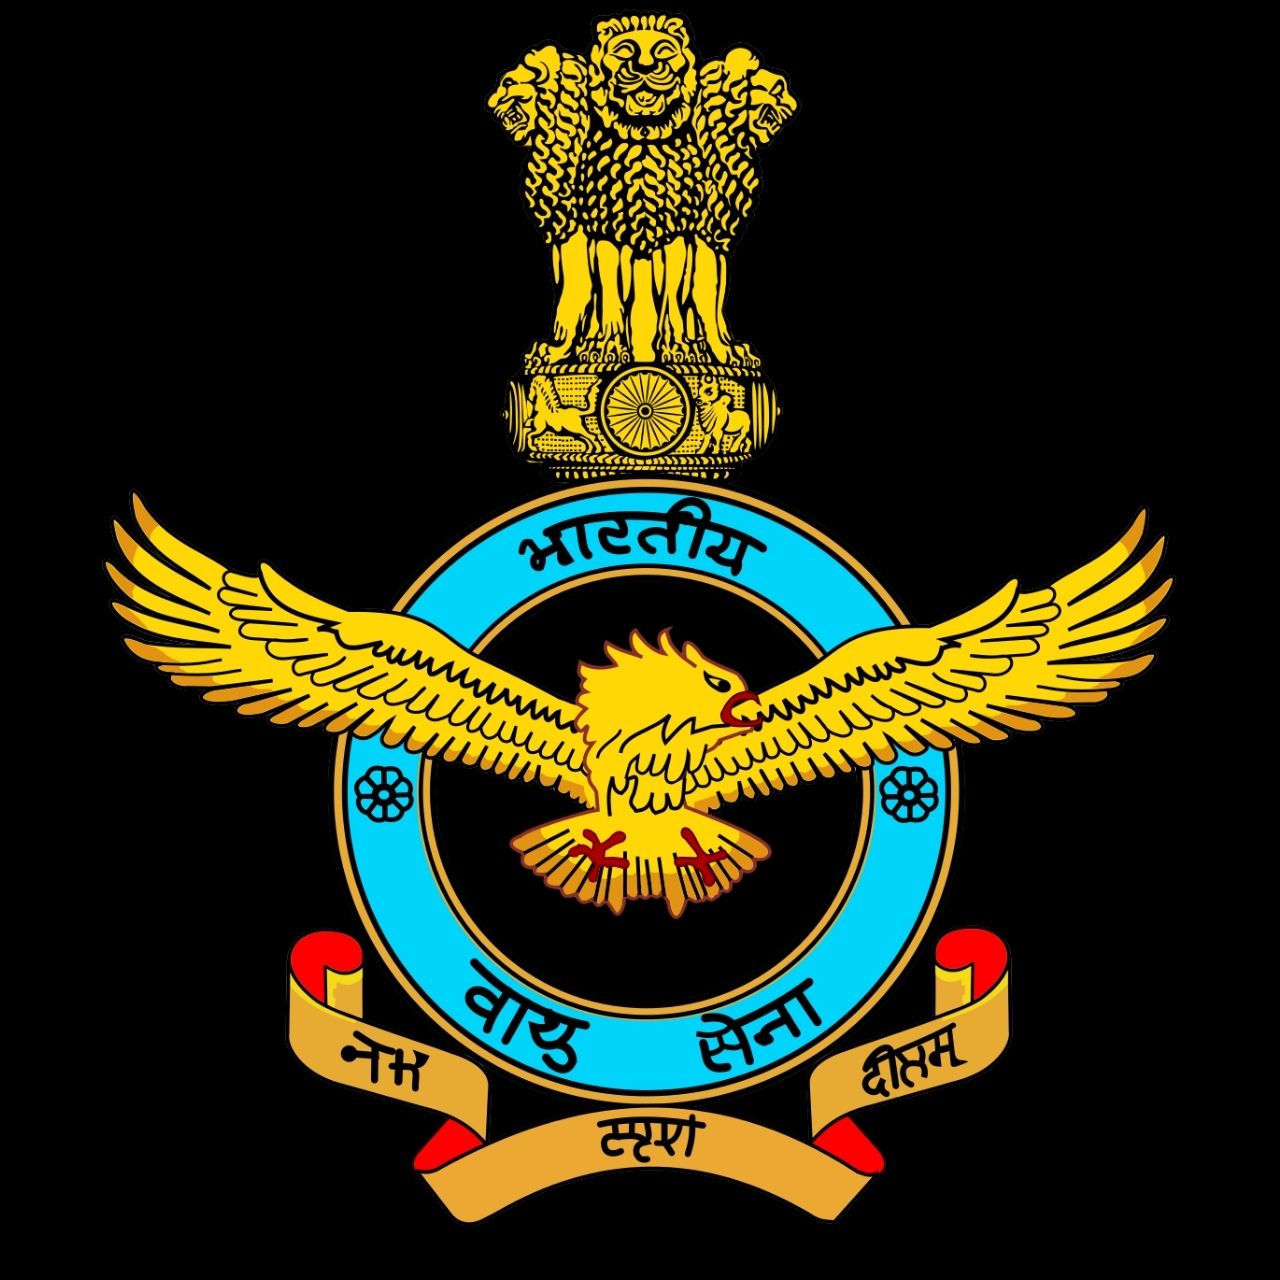 These 5 Bravehearts of the Indian Air Force will try hard to bring medals to Tokyo Olympics 2020